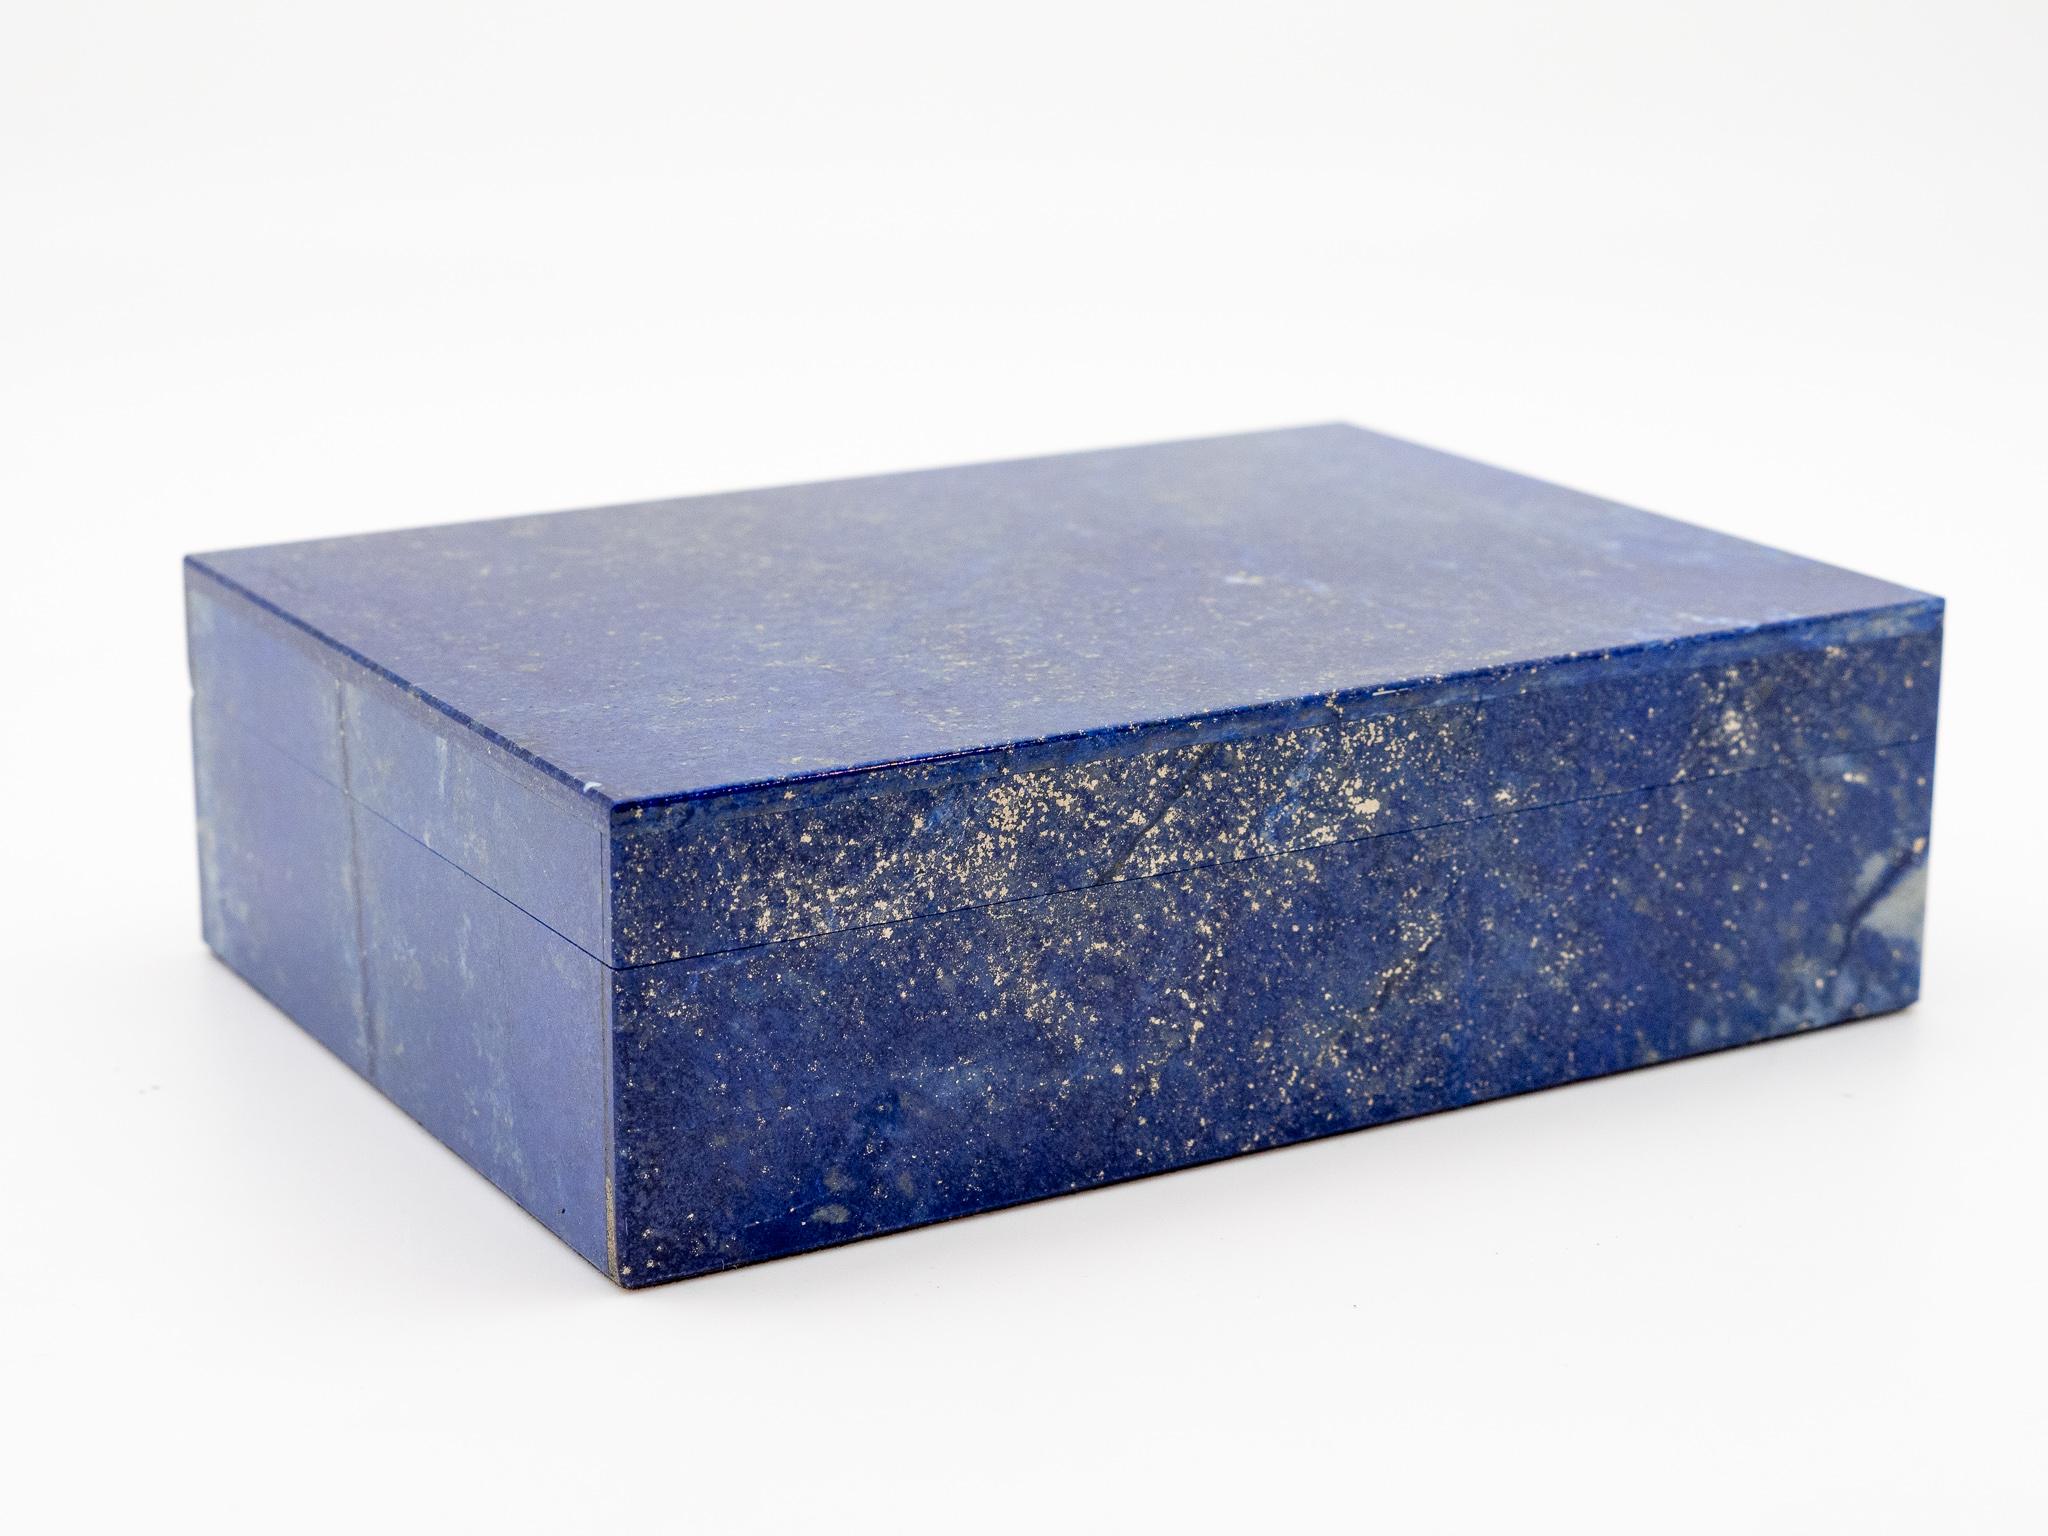 Beautiful lapis lazuli box with hinged lid. The stone was mined in Afghanistan, then cut, polished and crafted for Creel and Gow in India.
Afghanistan was also the main source of lapis for the ancient Egyptians Mesopotamians, as well as the Greeks